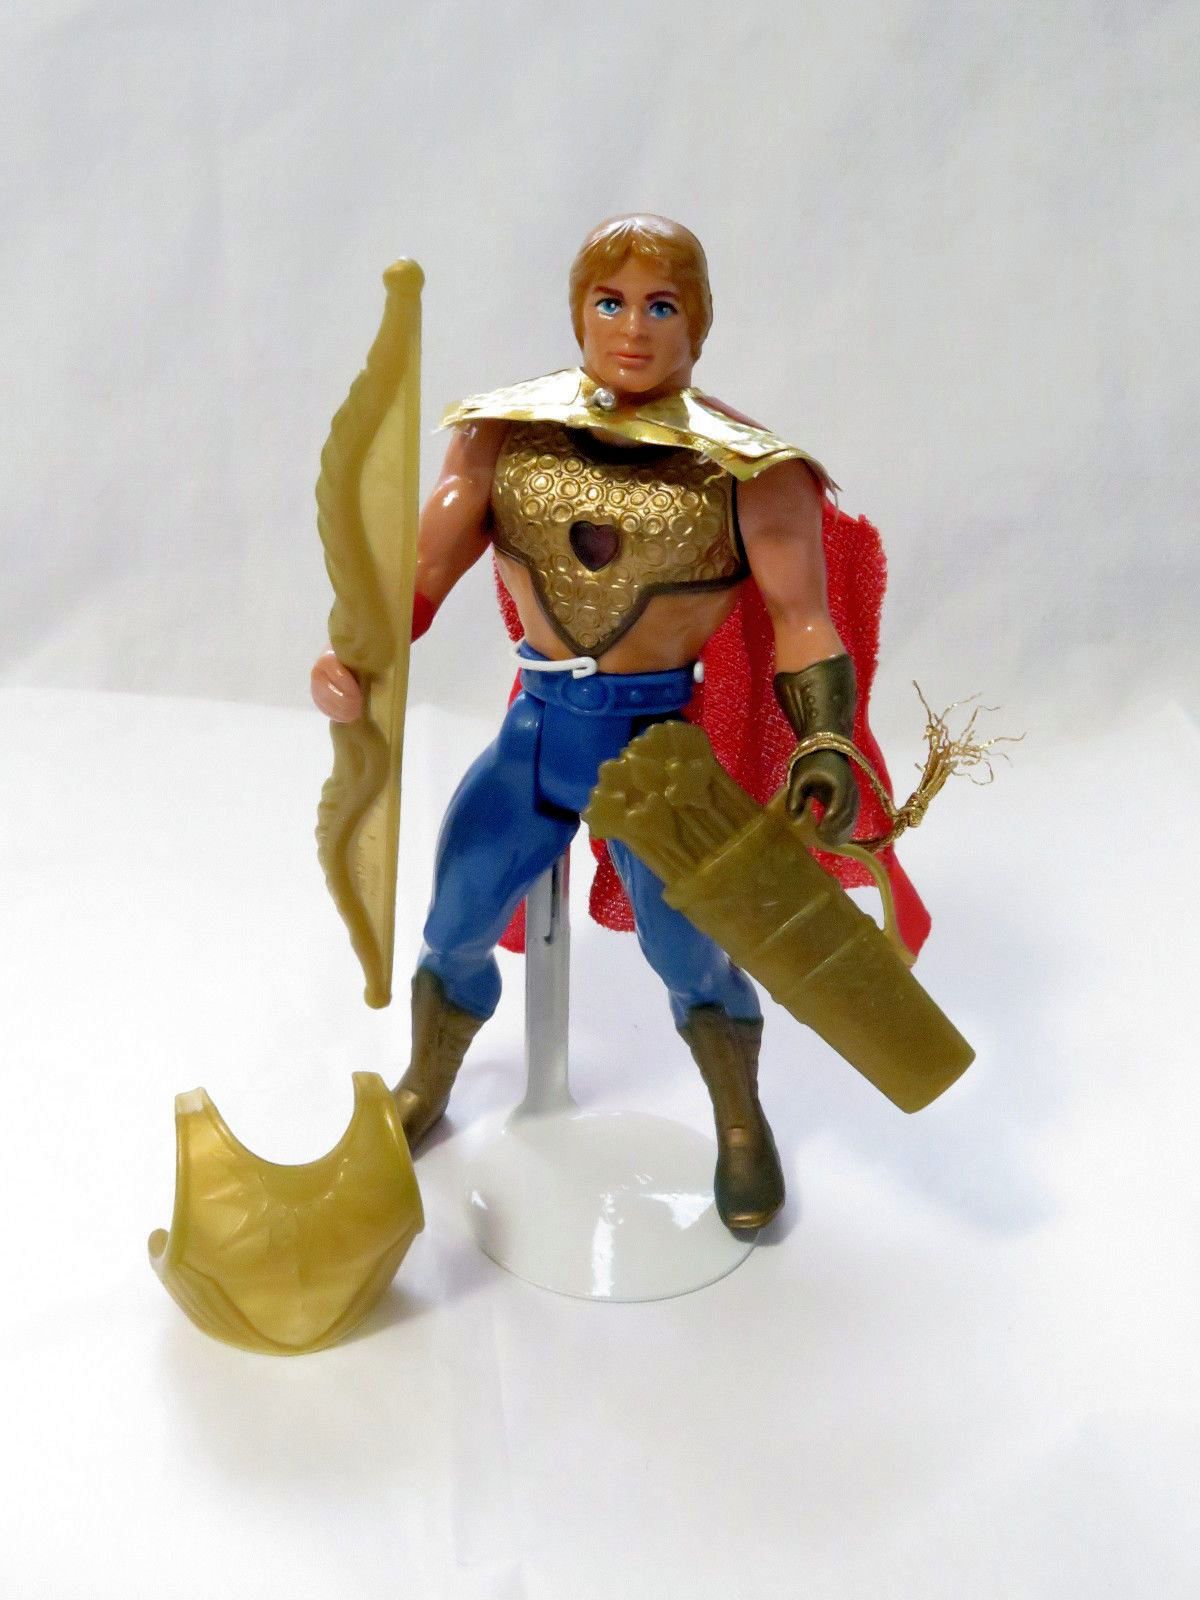 She-Ra: Princess of Power (1985) - (figures, dolls, toys and objects) 7